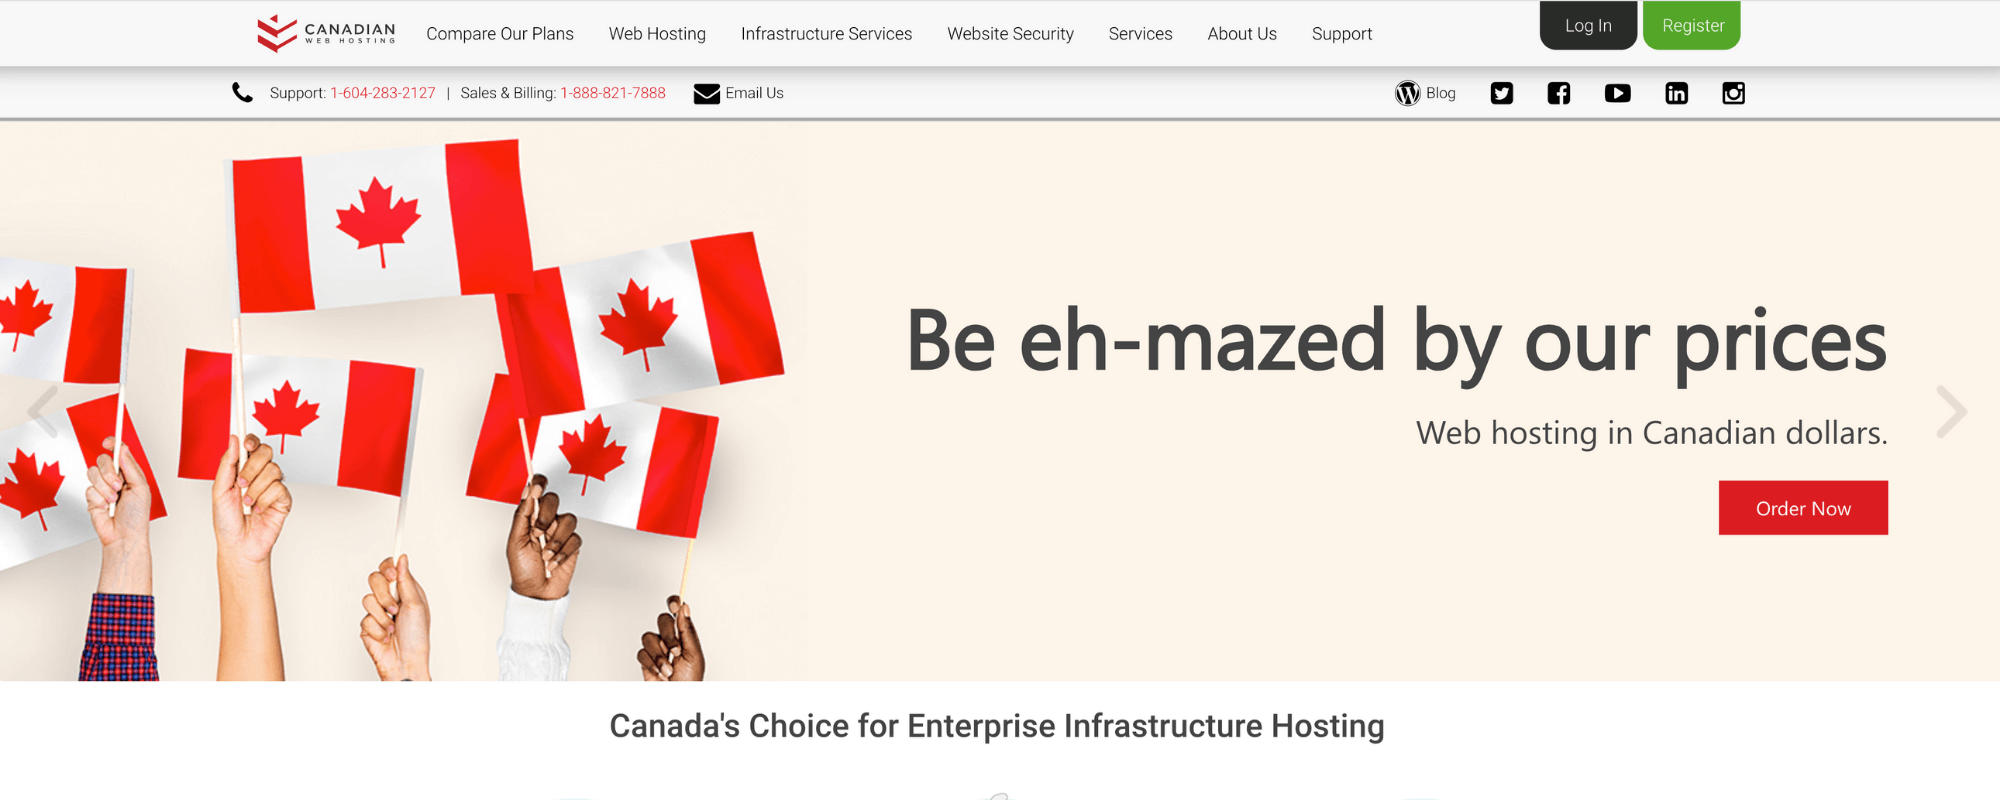 Hosting Services in Canada – Top 5 – Canadian Web Hosting